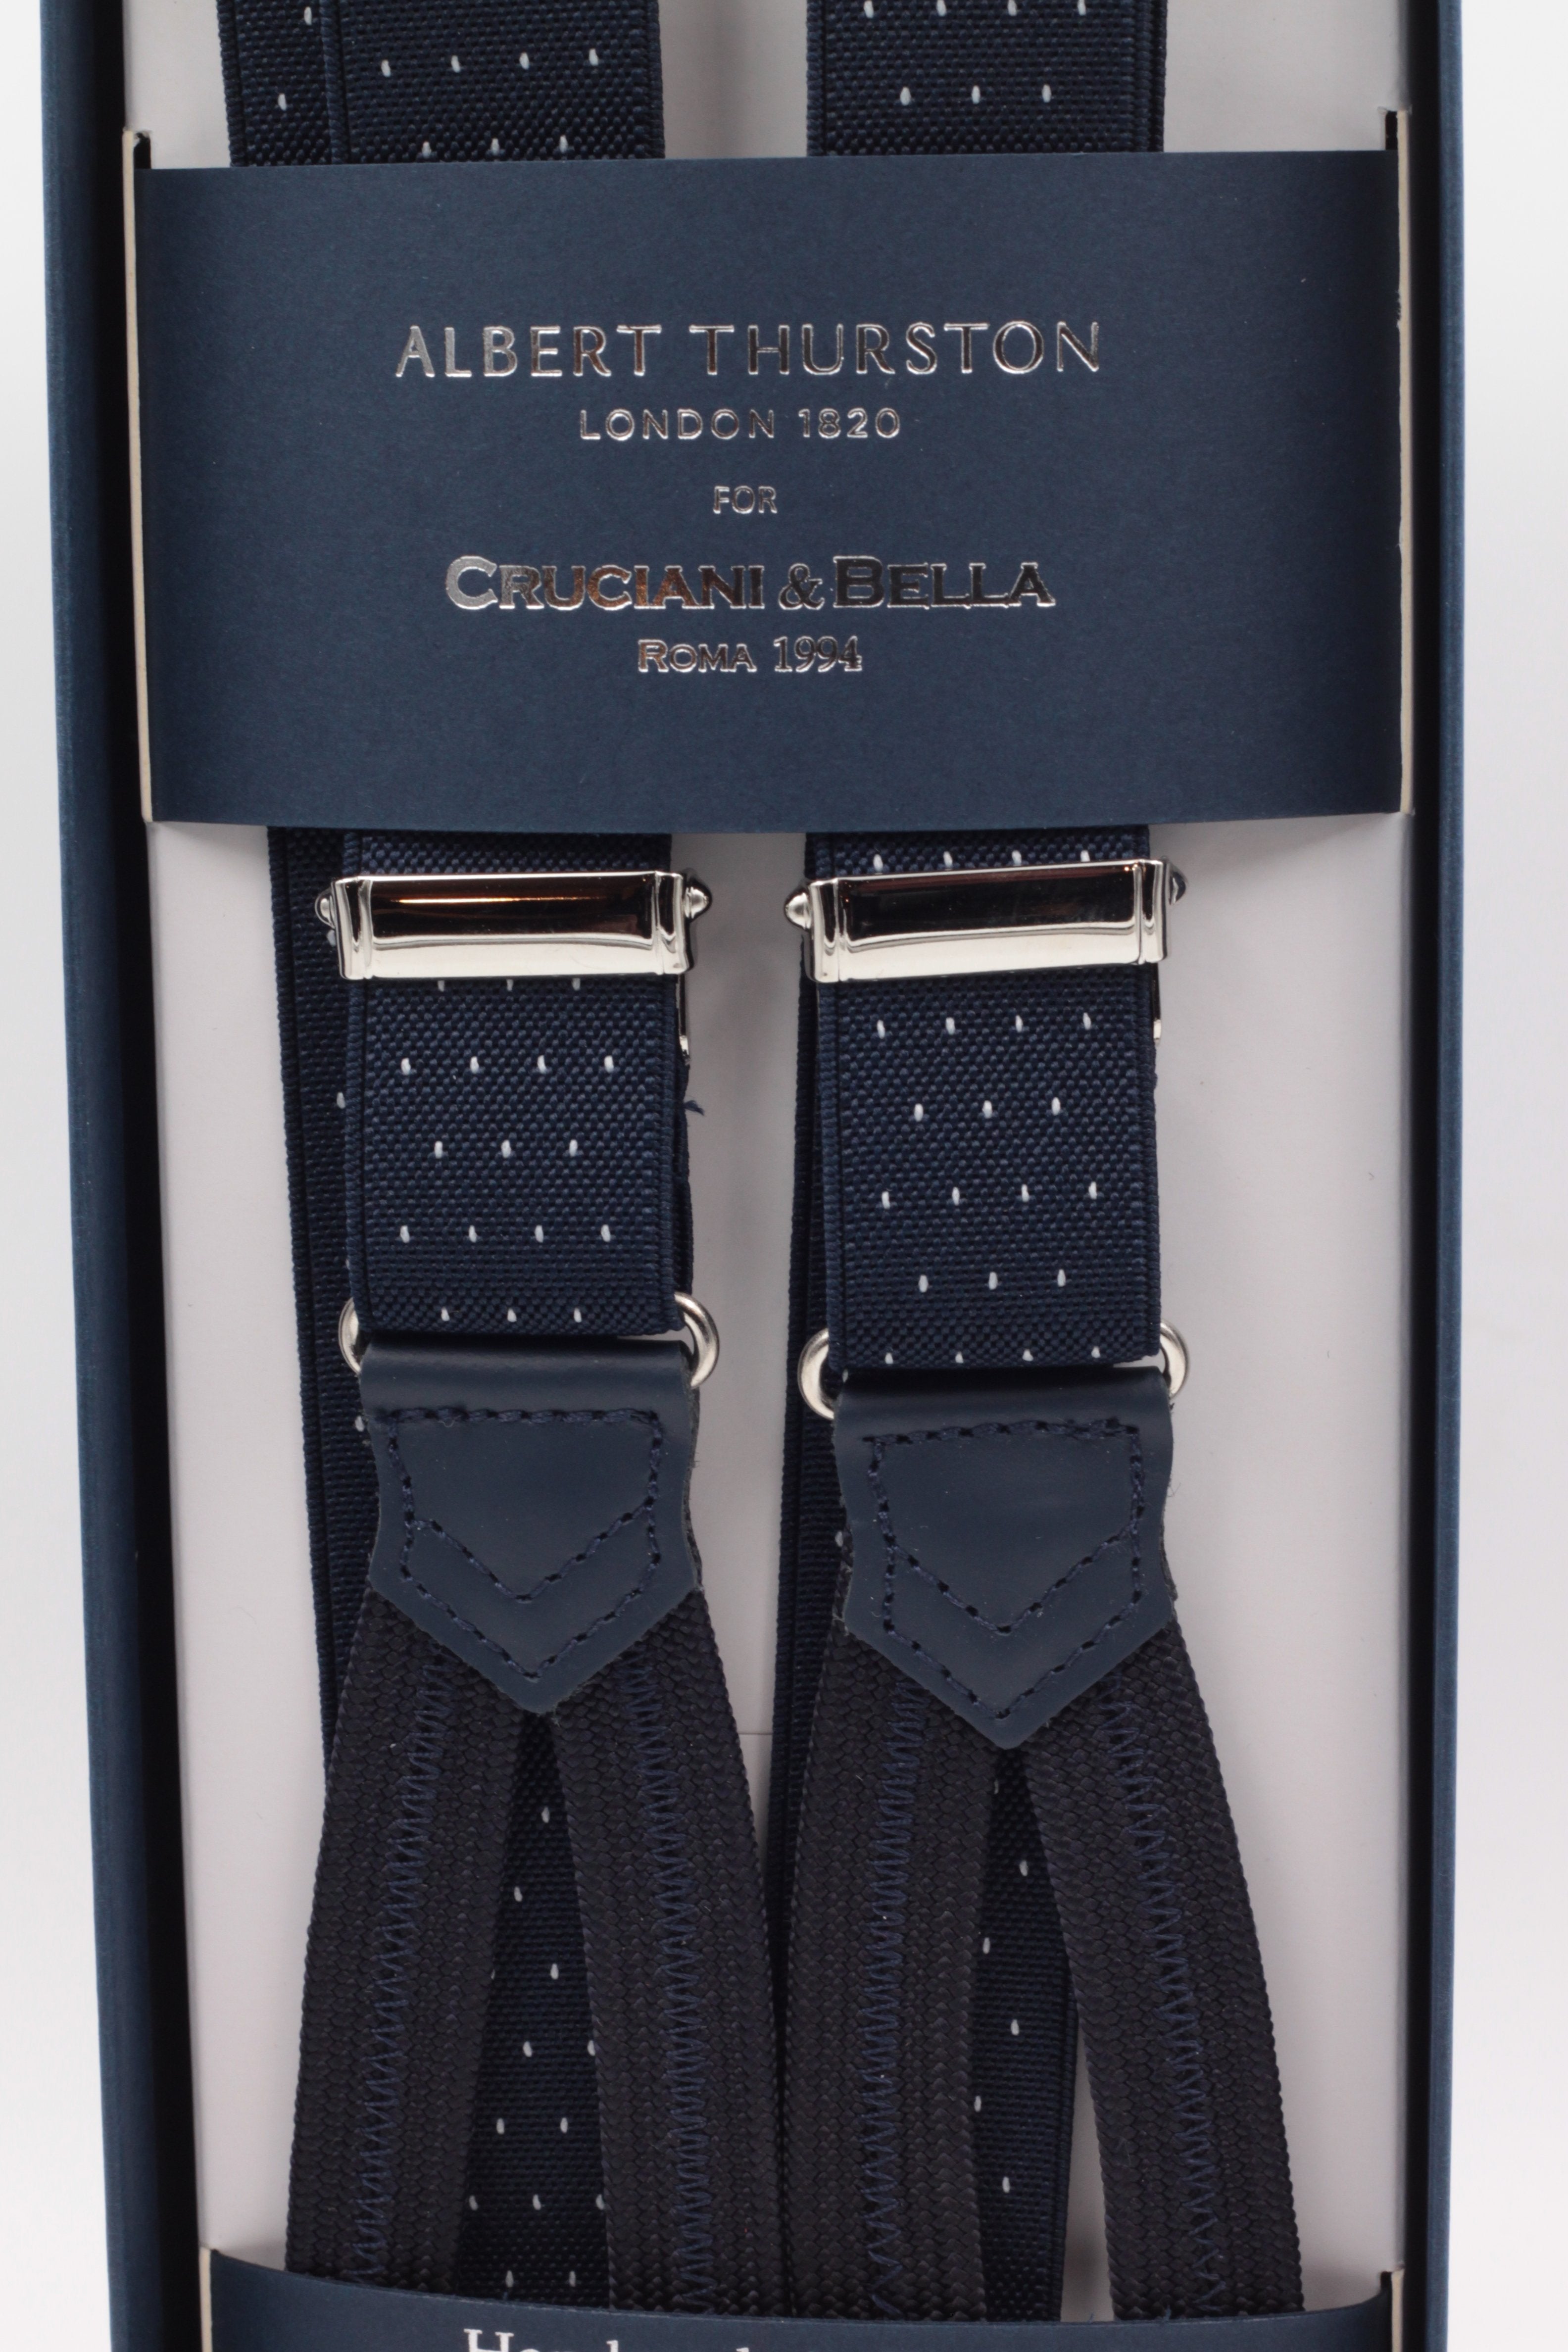 Albert Thurston for Cruciani & Bella Made in England Adjustable Sizing 25 mm elastic braces Midnight blue, white dots Braid ends Y-Shaped Nickel Fittings Size: L